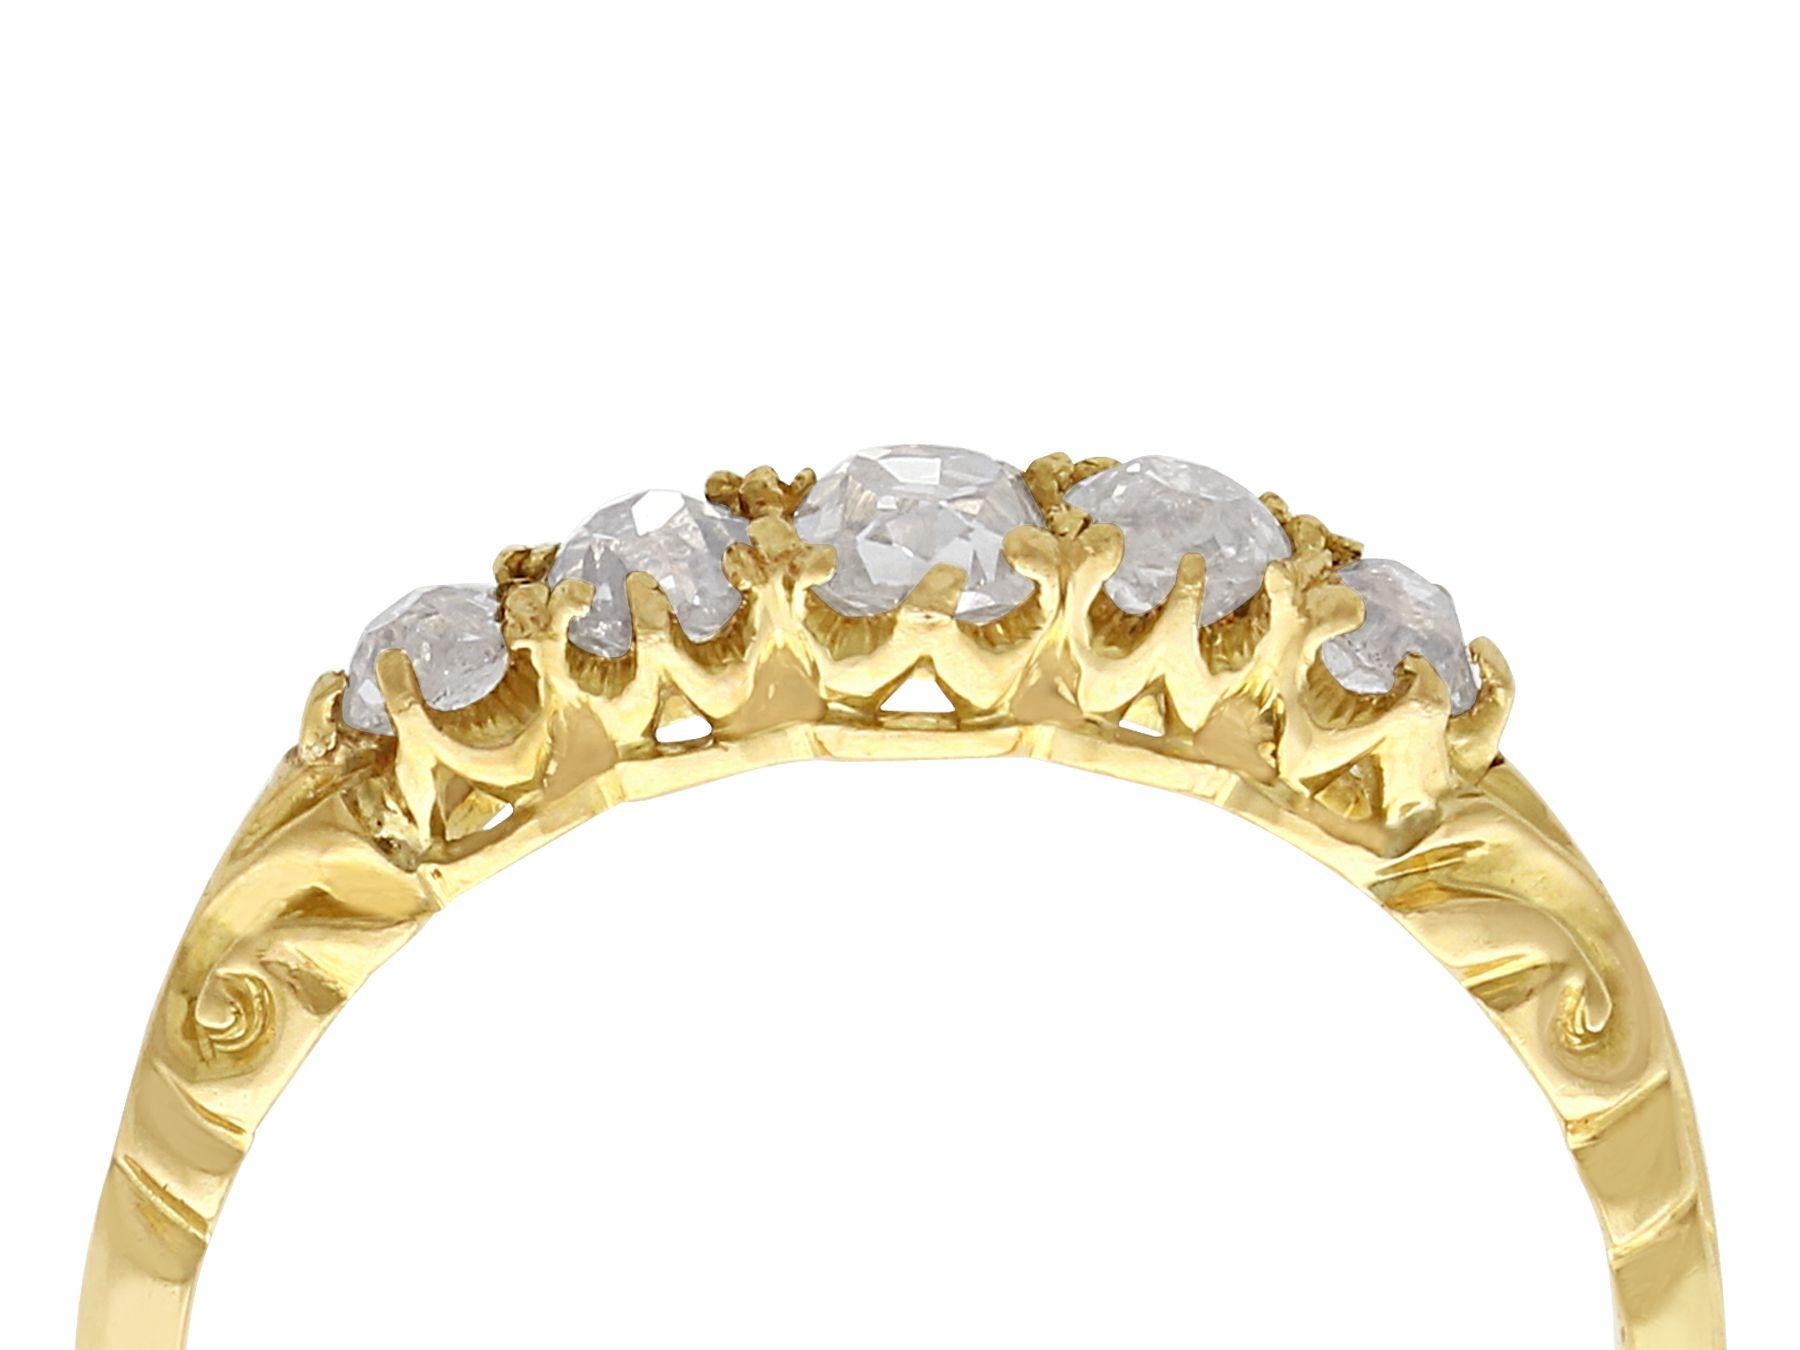 A fine and impressive antique 0.66 carat diamond and 18 karat yellow gold five stone ring; part of our diverse antique jewelry and estate jewelry collections.

This fine and impressive antique five stone diamond ring has been crafted in 18k yellow